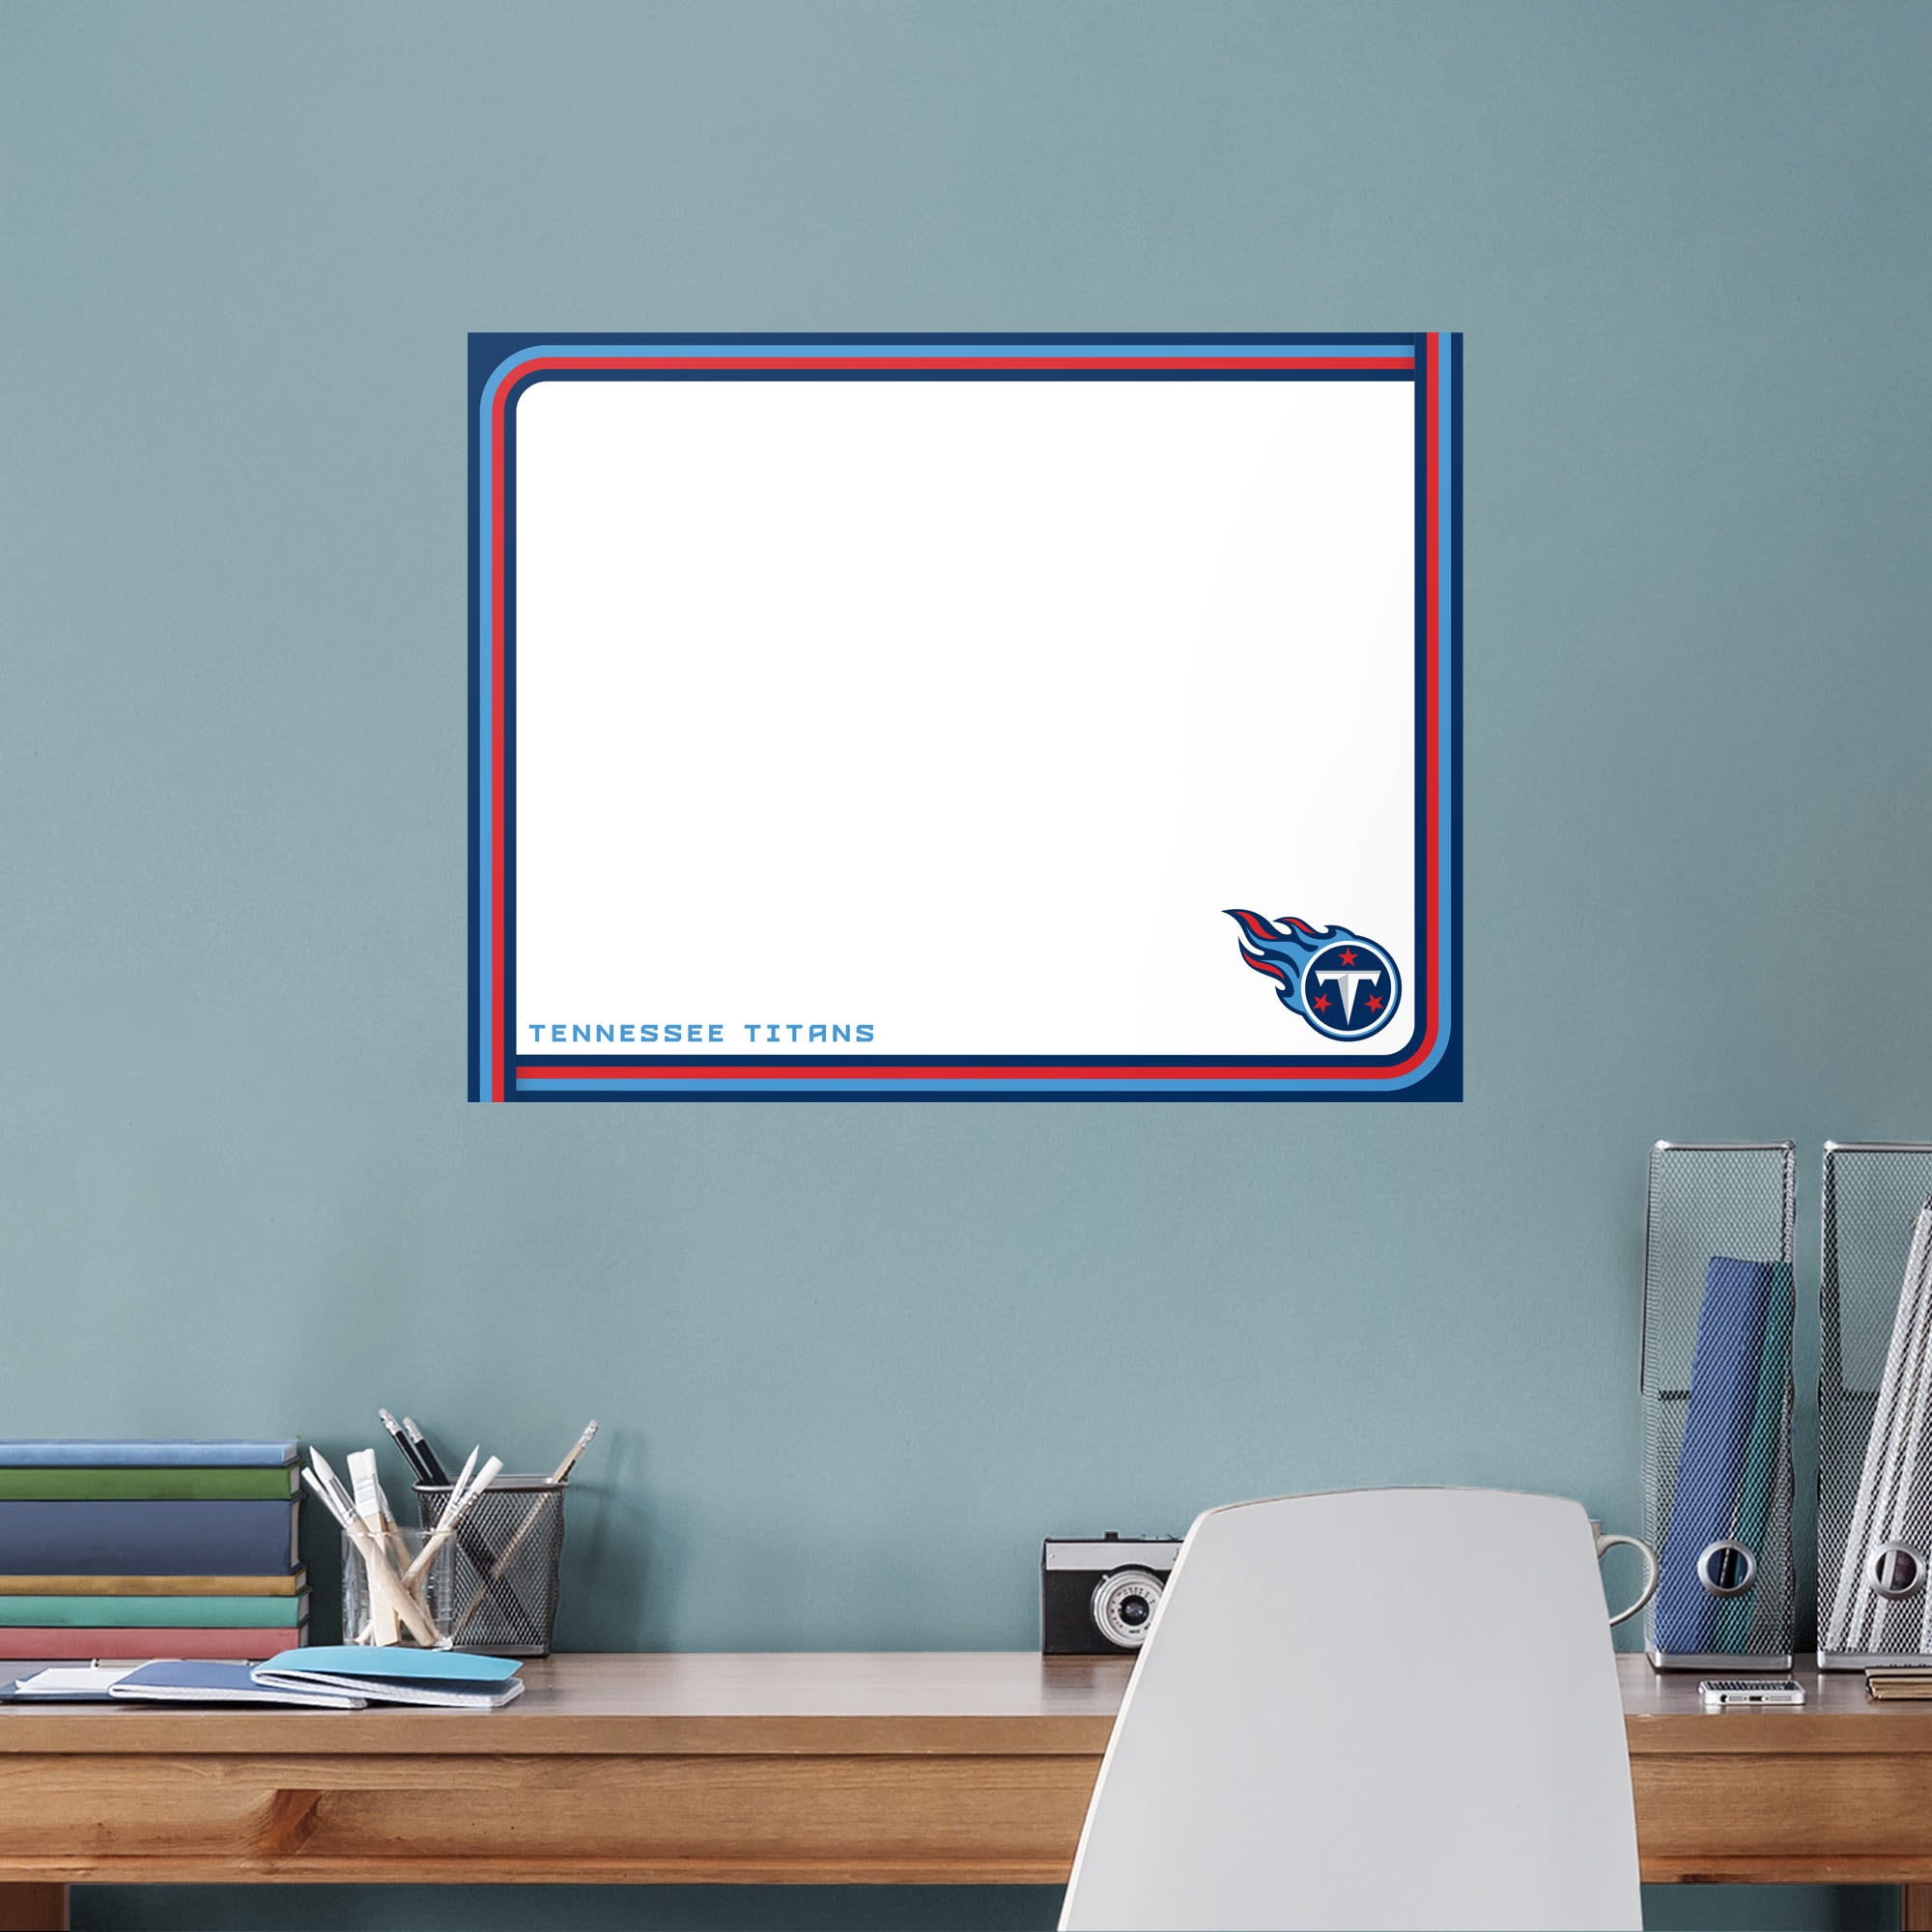 Tennessee Titans: Dry Erase Whiteboard - Officially Licensed NFL Removable Wall Decal XL by Fathead | Vinyl